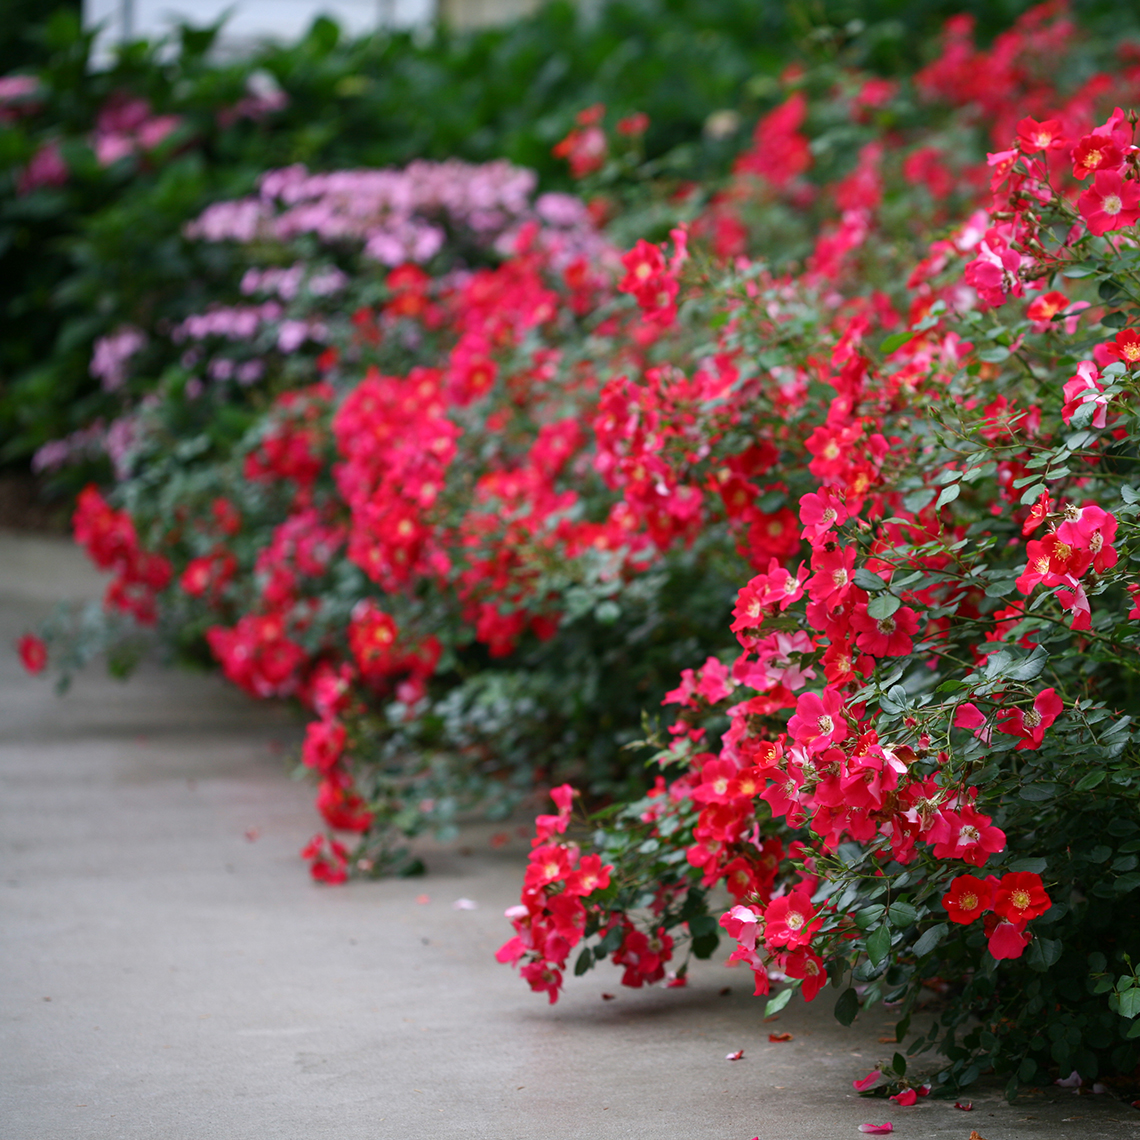 Red blooms of Oso Easy Cherry Pie Rosa spilling onto cement walkway